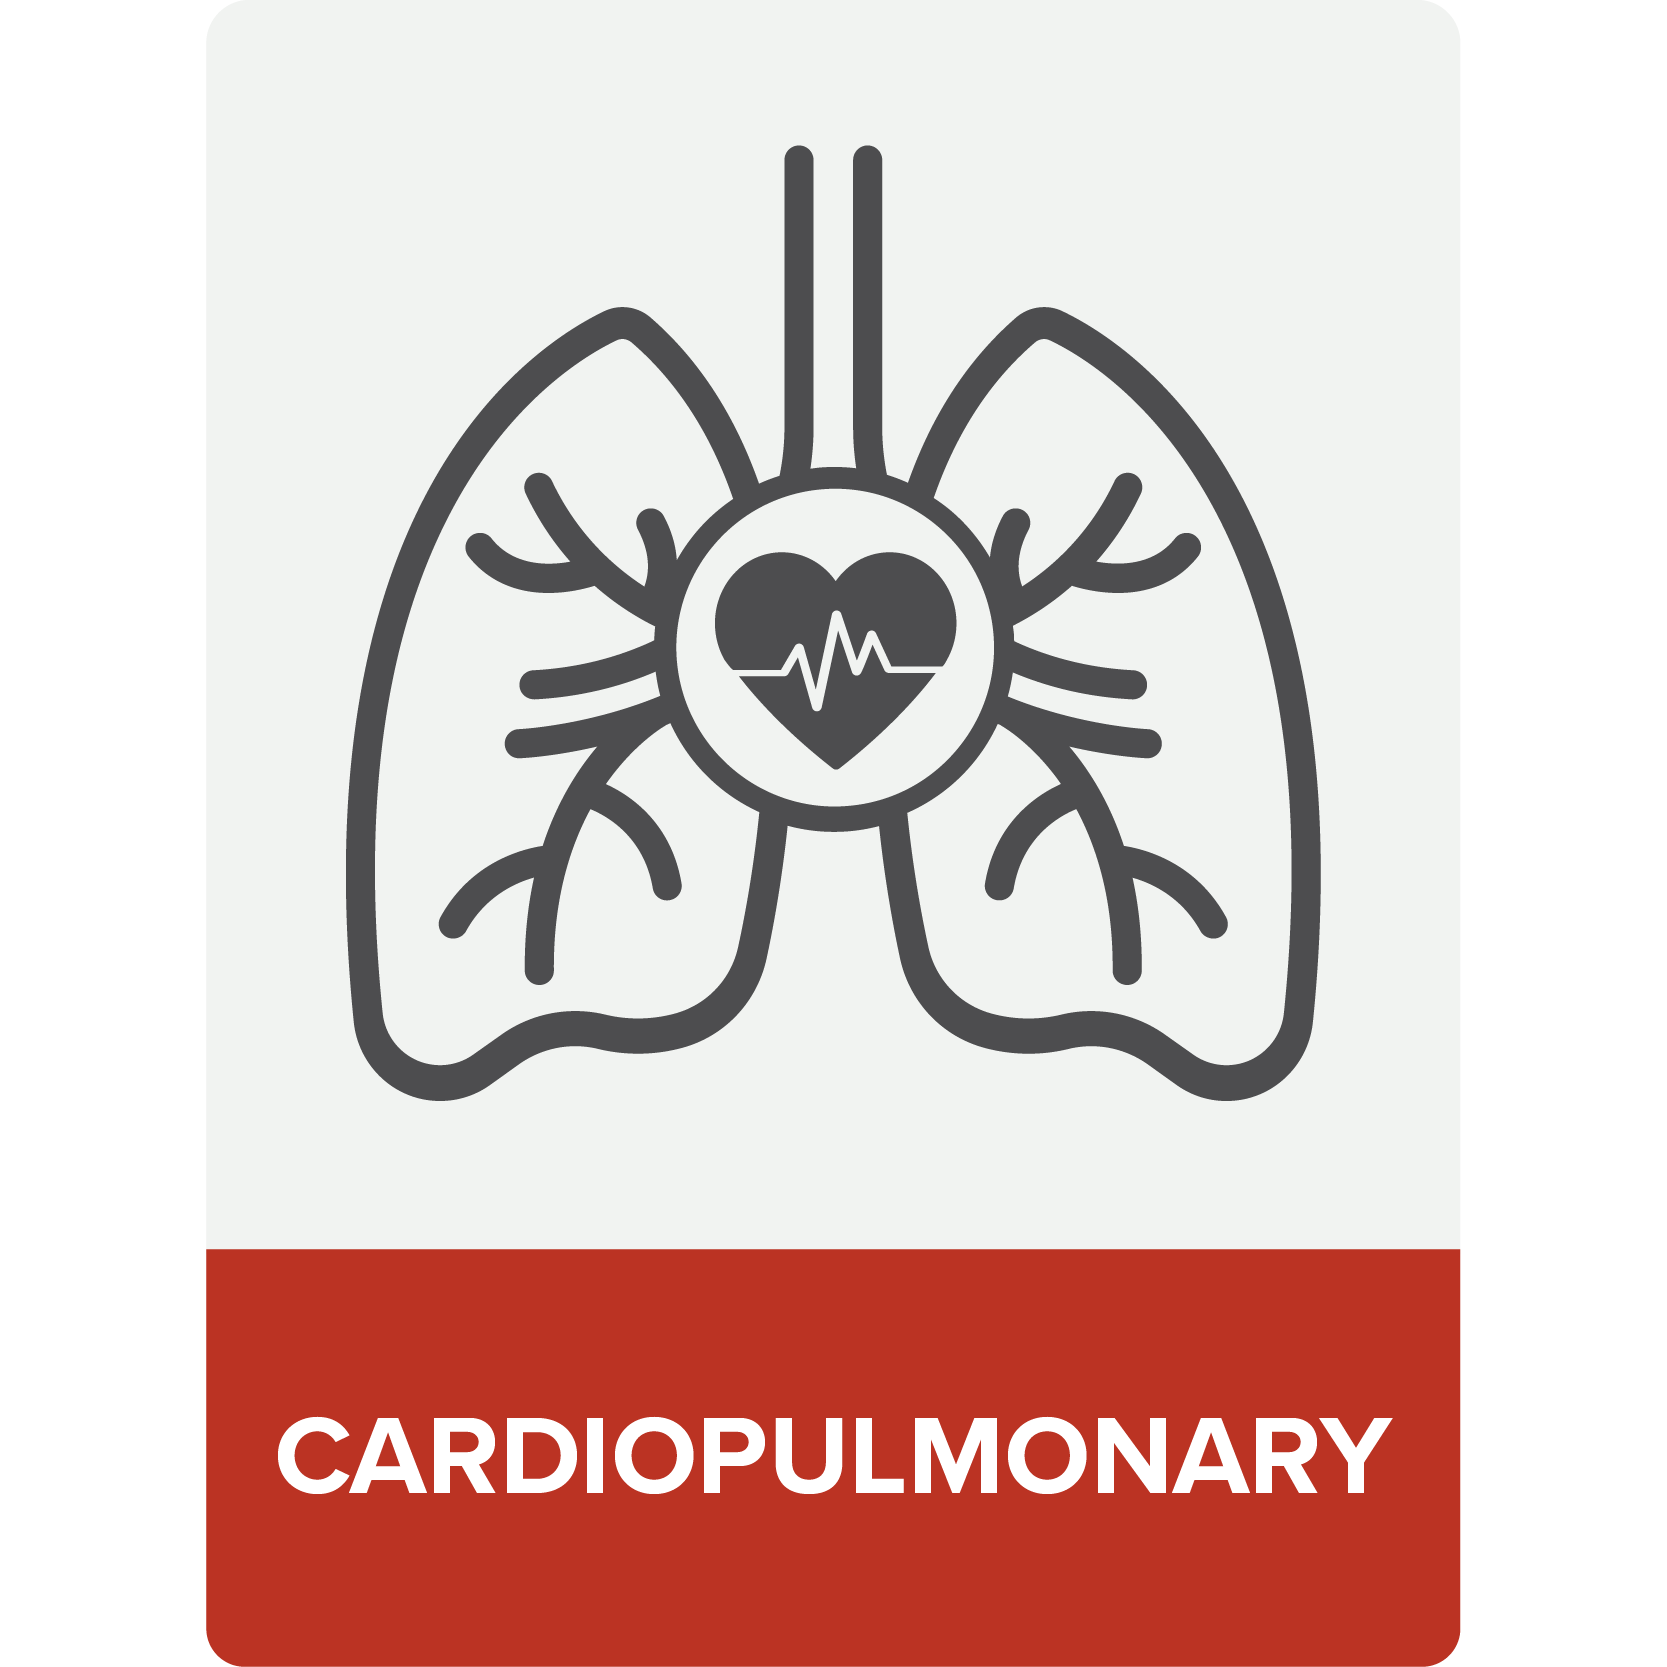 heart and lungs icon with the word "cardiopulmonary" on a red background